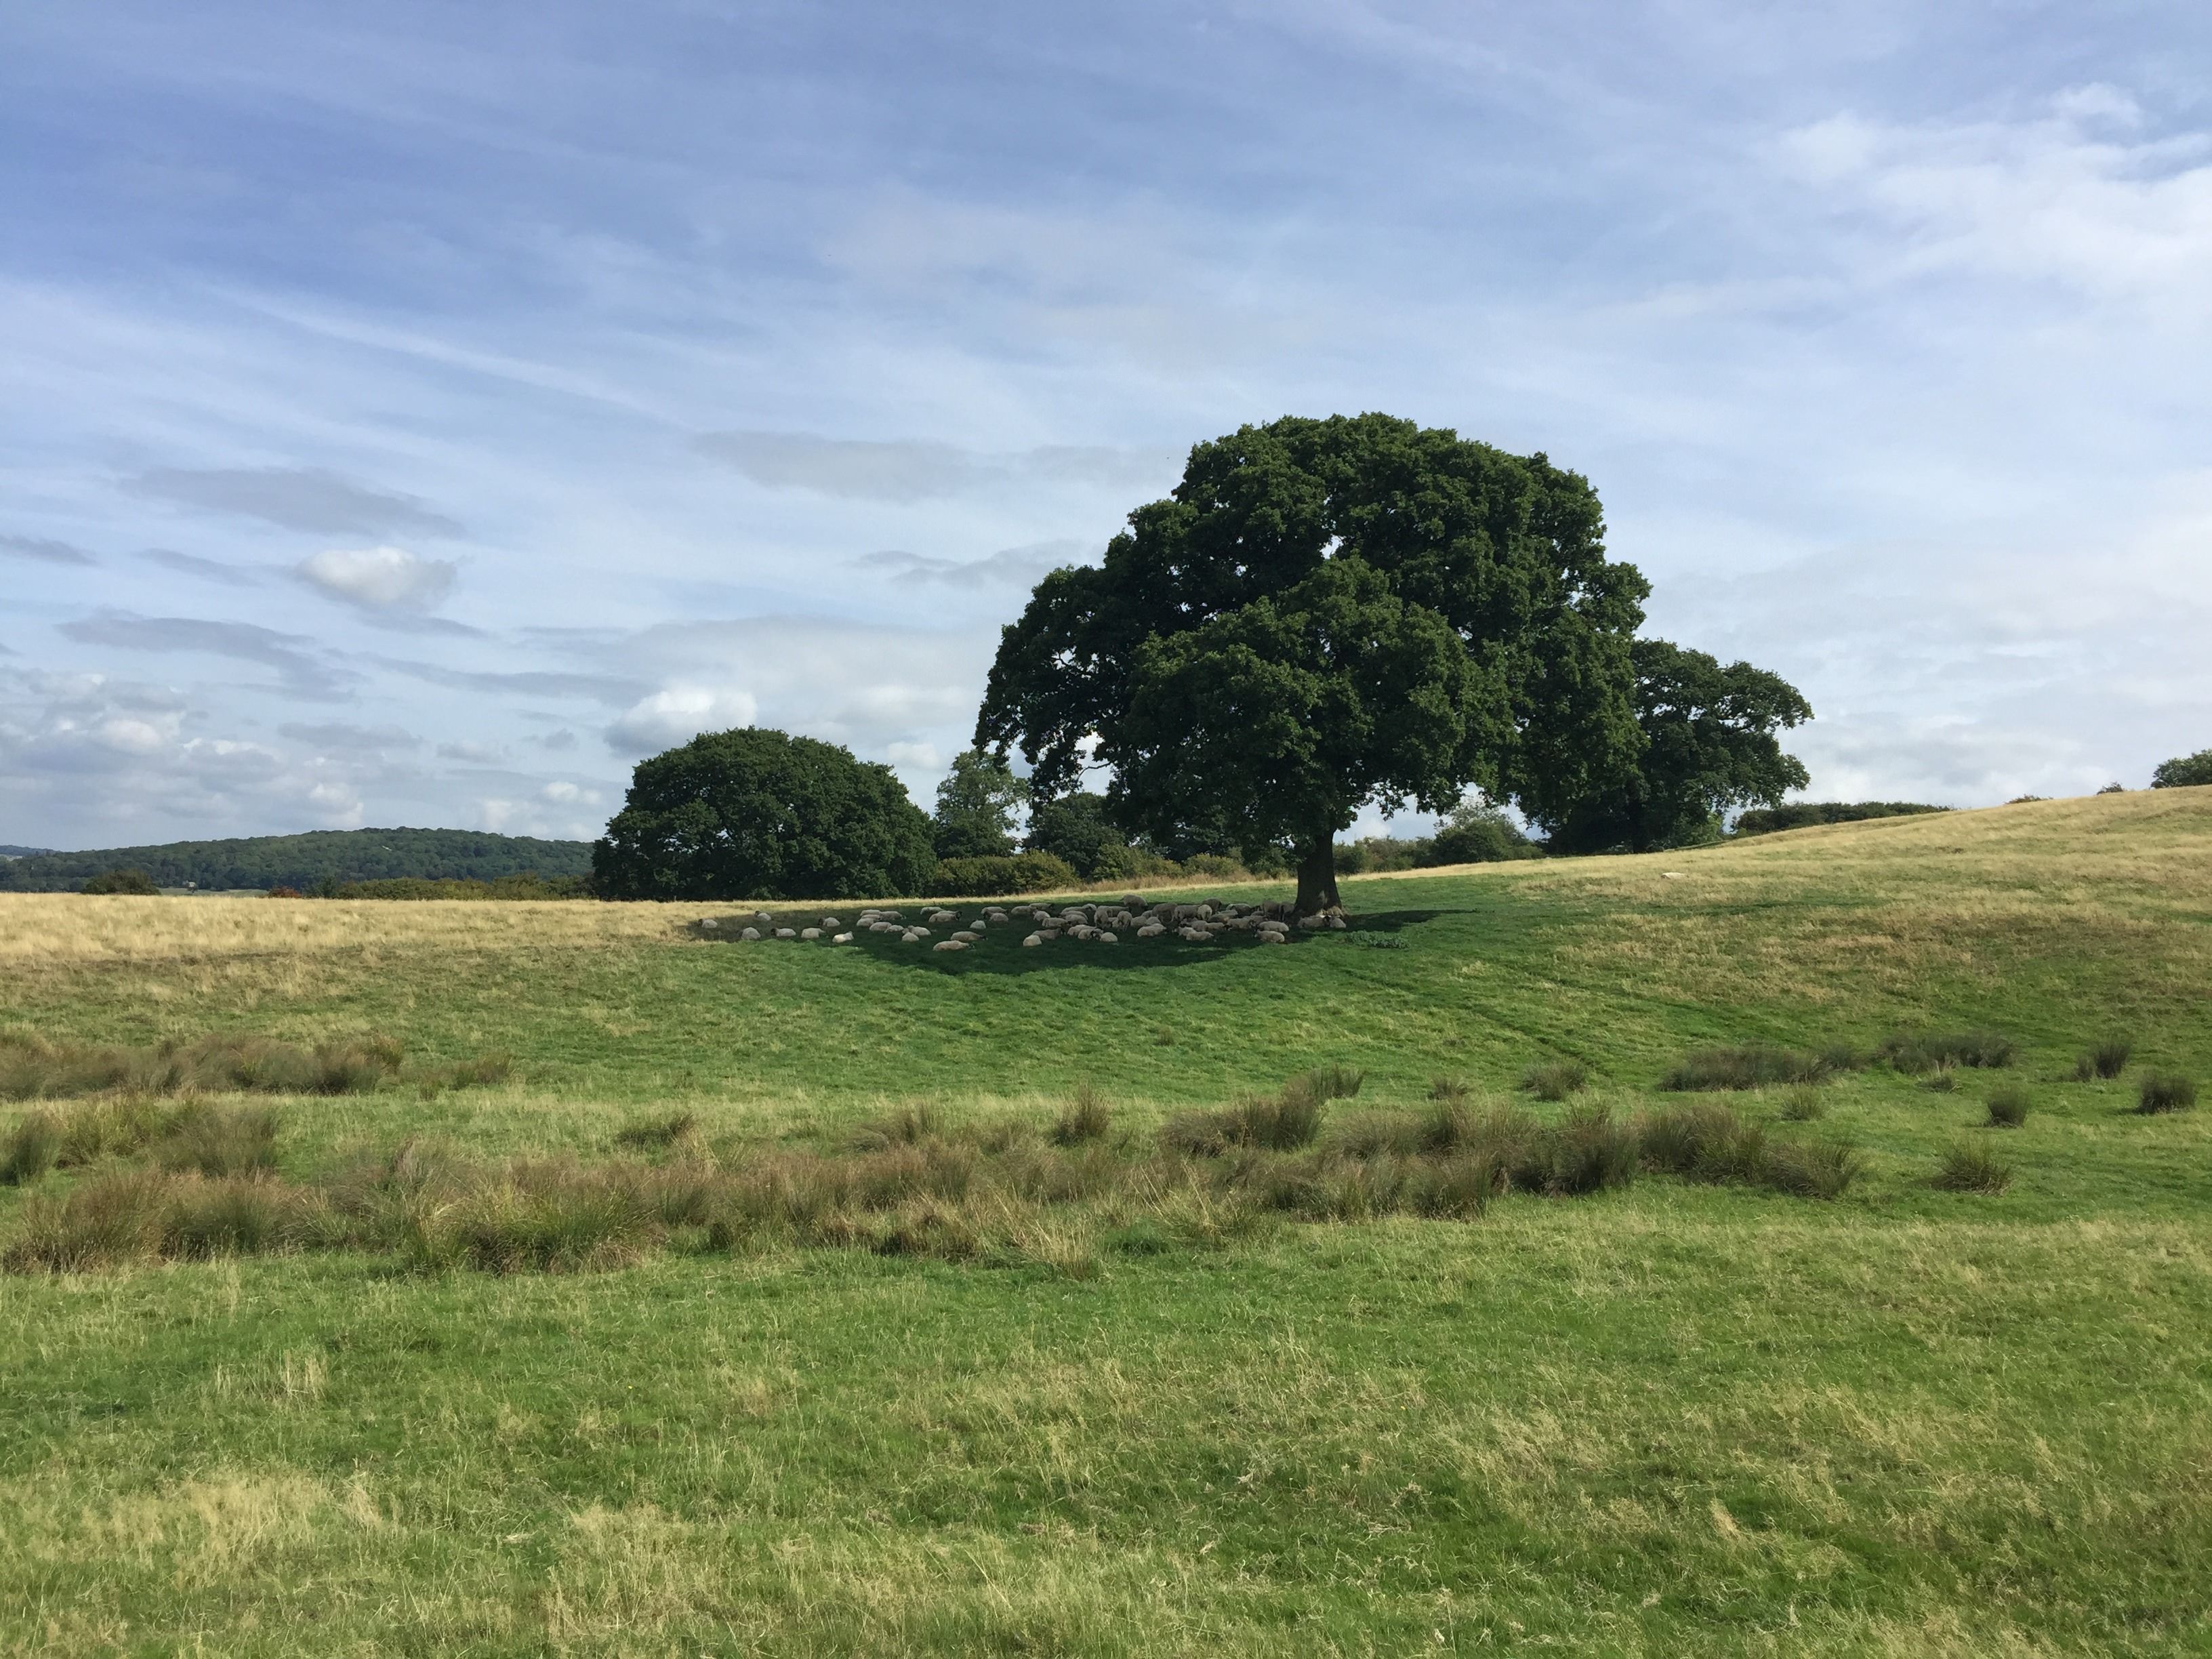 Cotswold Way tree